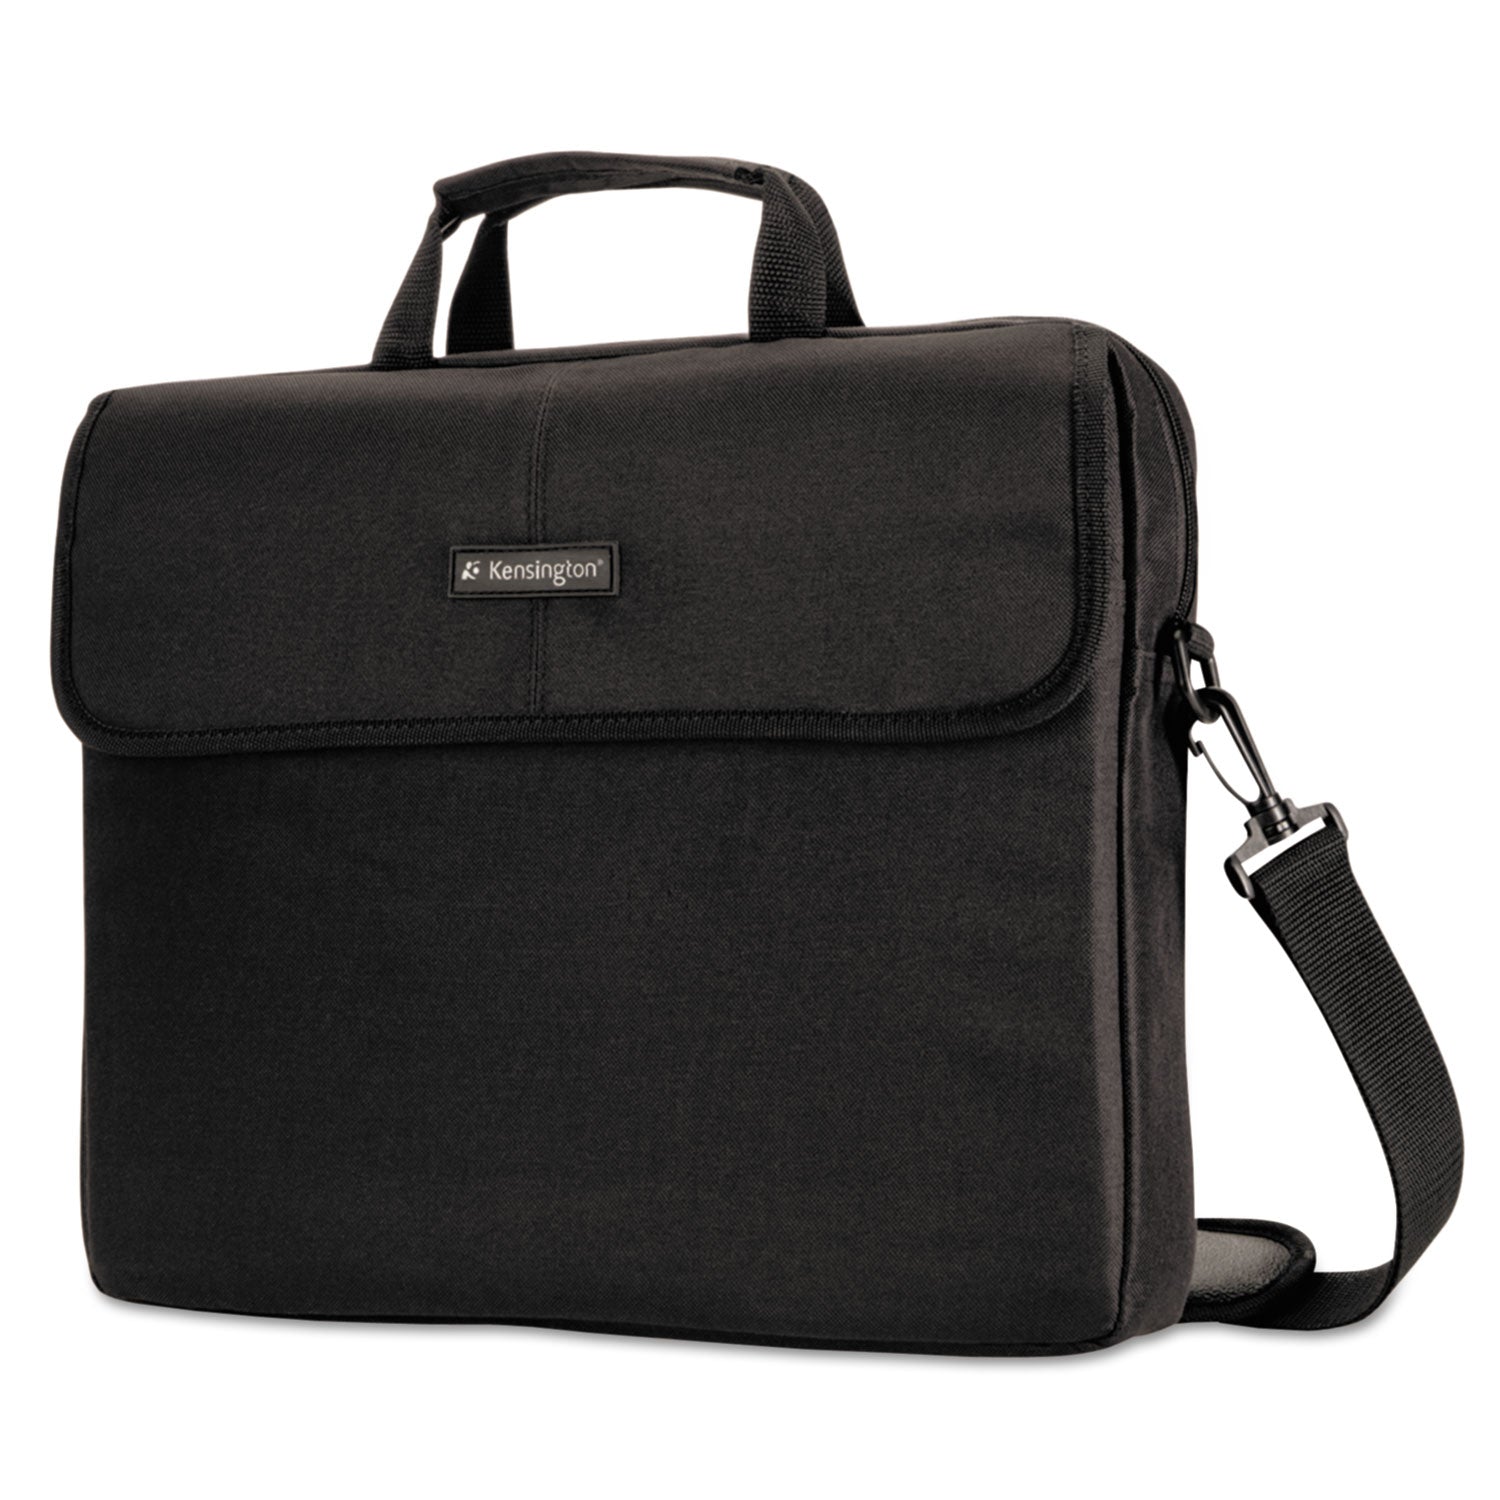 Simply Portable Padded Laptop Sleeve, Fits Devices Up to 15.6", Polyester, 17 x 1.5 x 12, Black - 